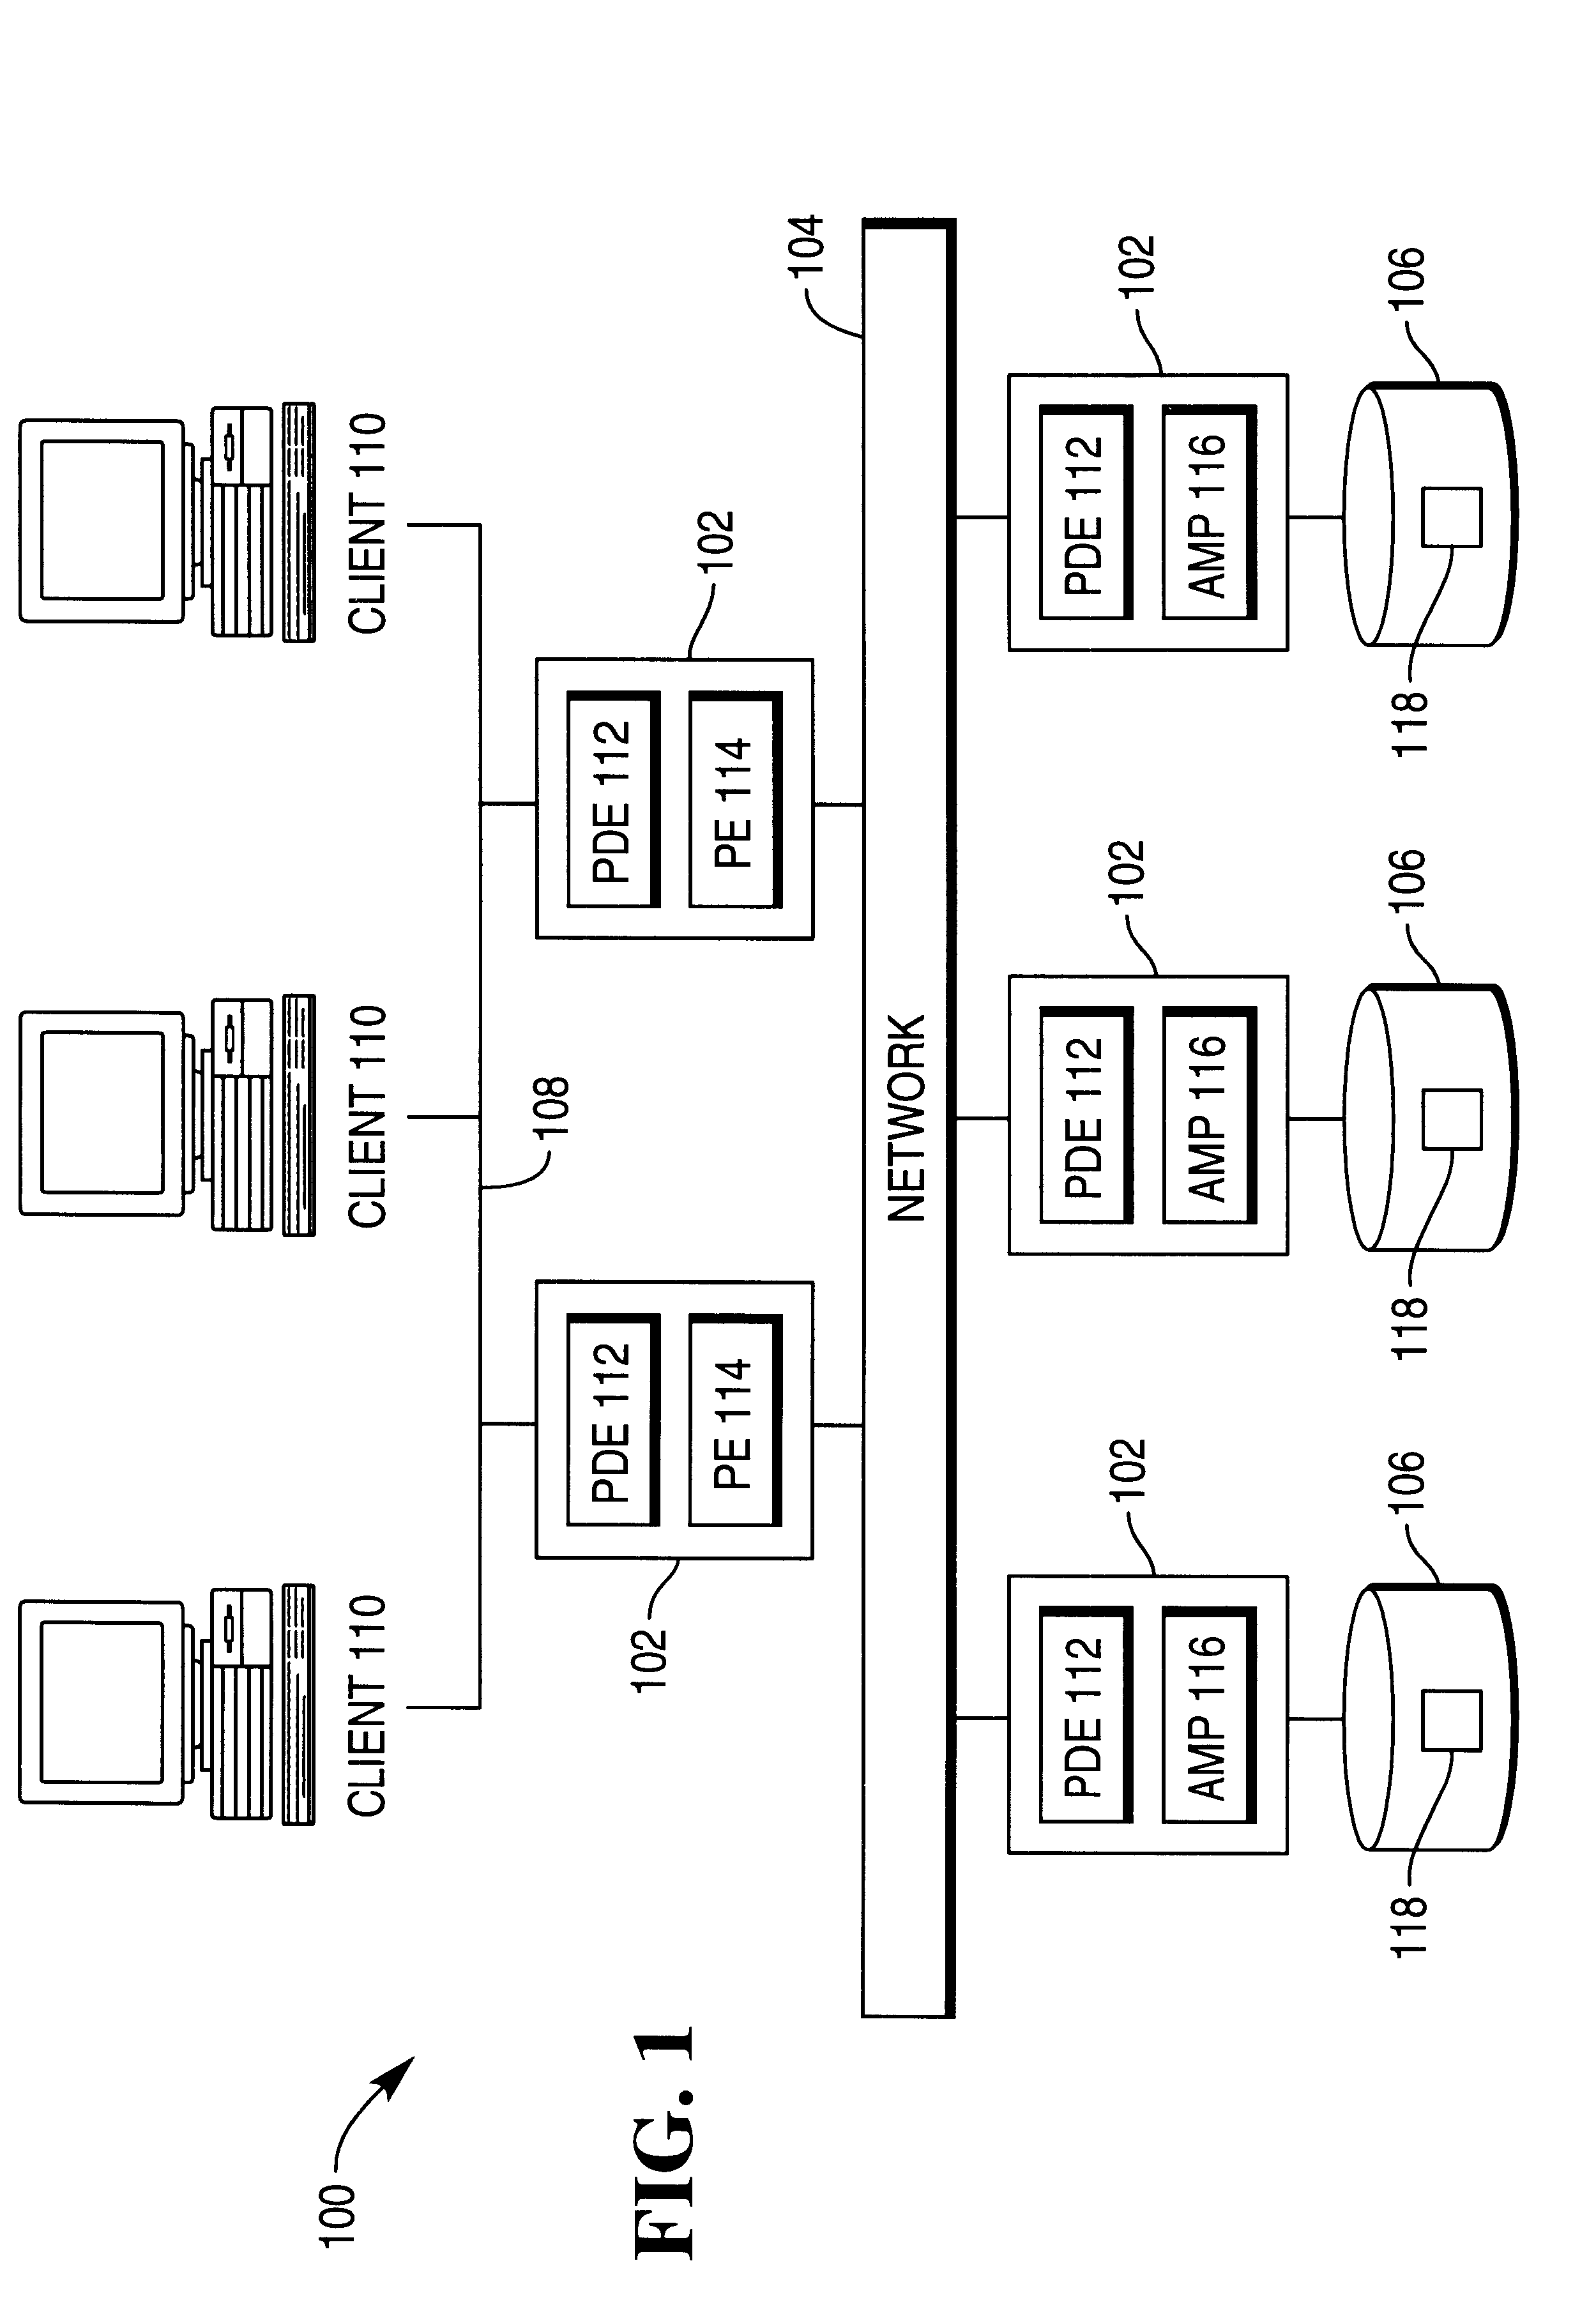 Computing multiple order-based functions in a parallel processing database system